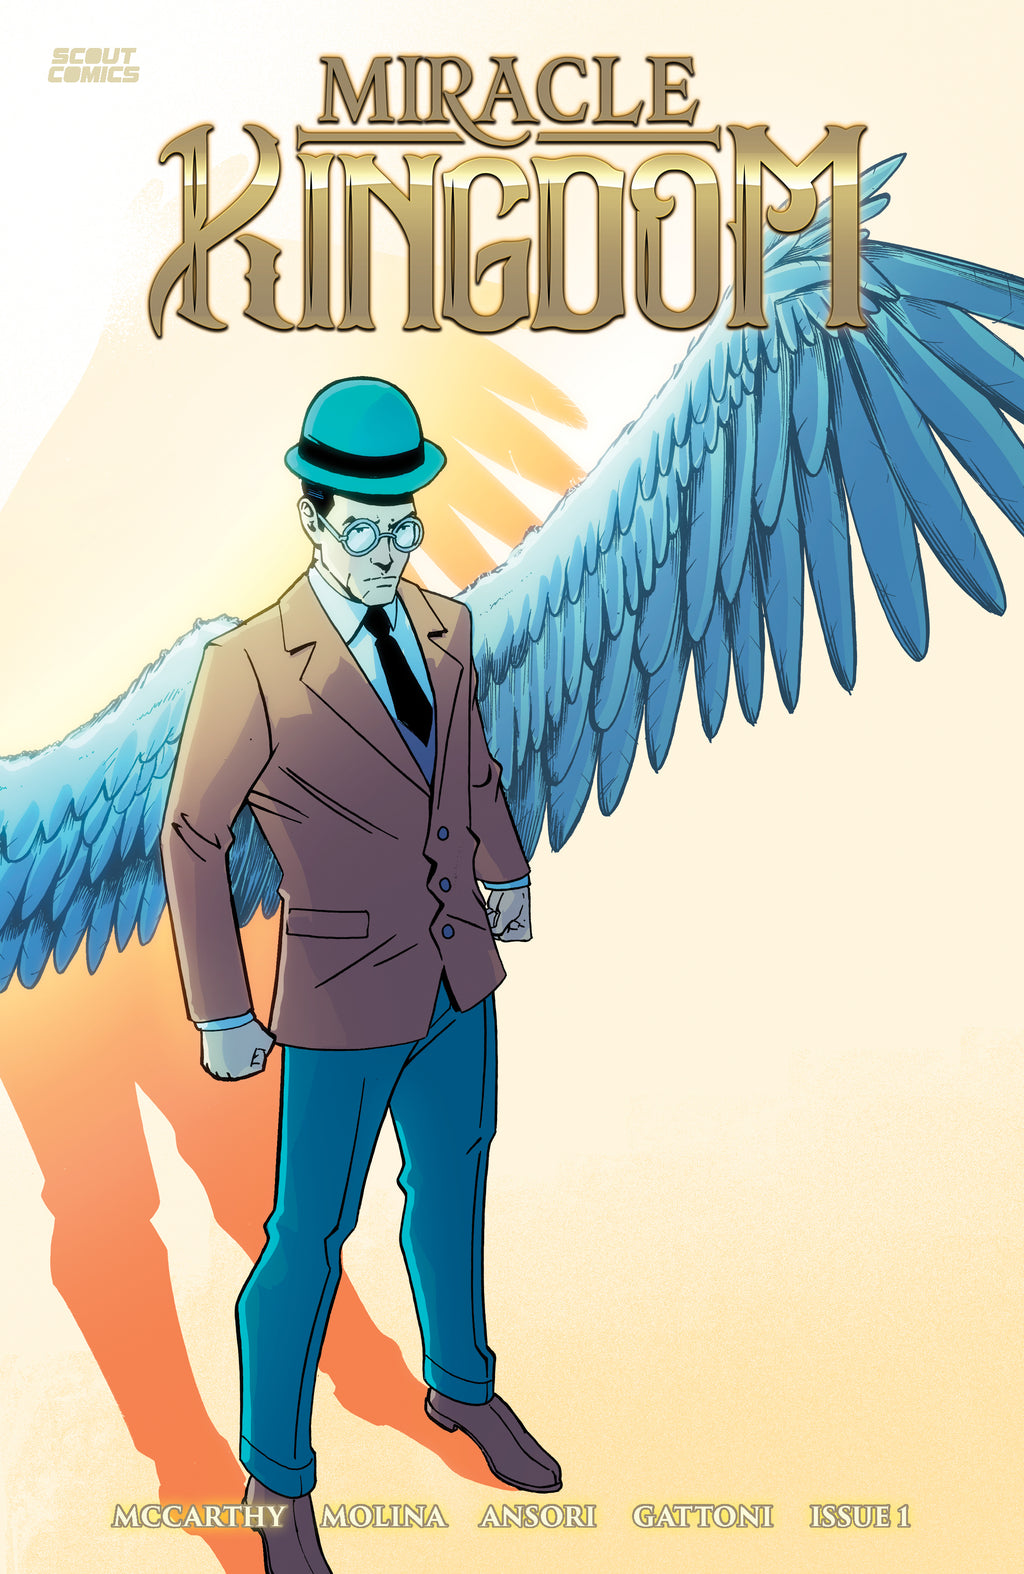 SCOUT SELECT PREMIUM ITEM - Miracle Kingdom #1 - Webstore Exclusive Cover (Ralf Singh) - FEBRUARY 2024